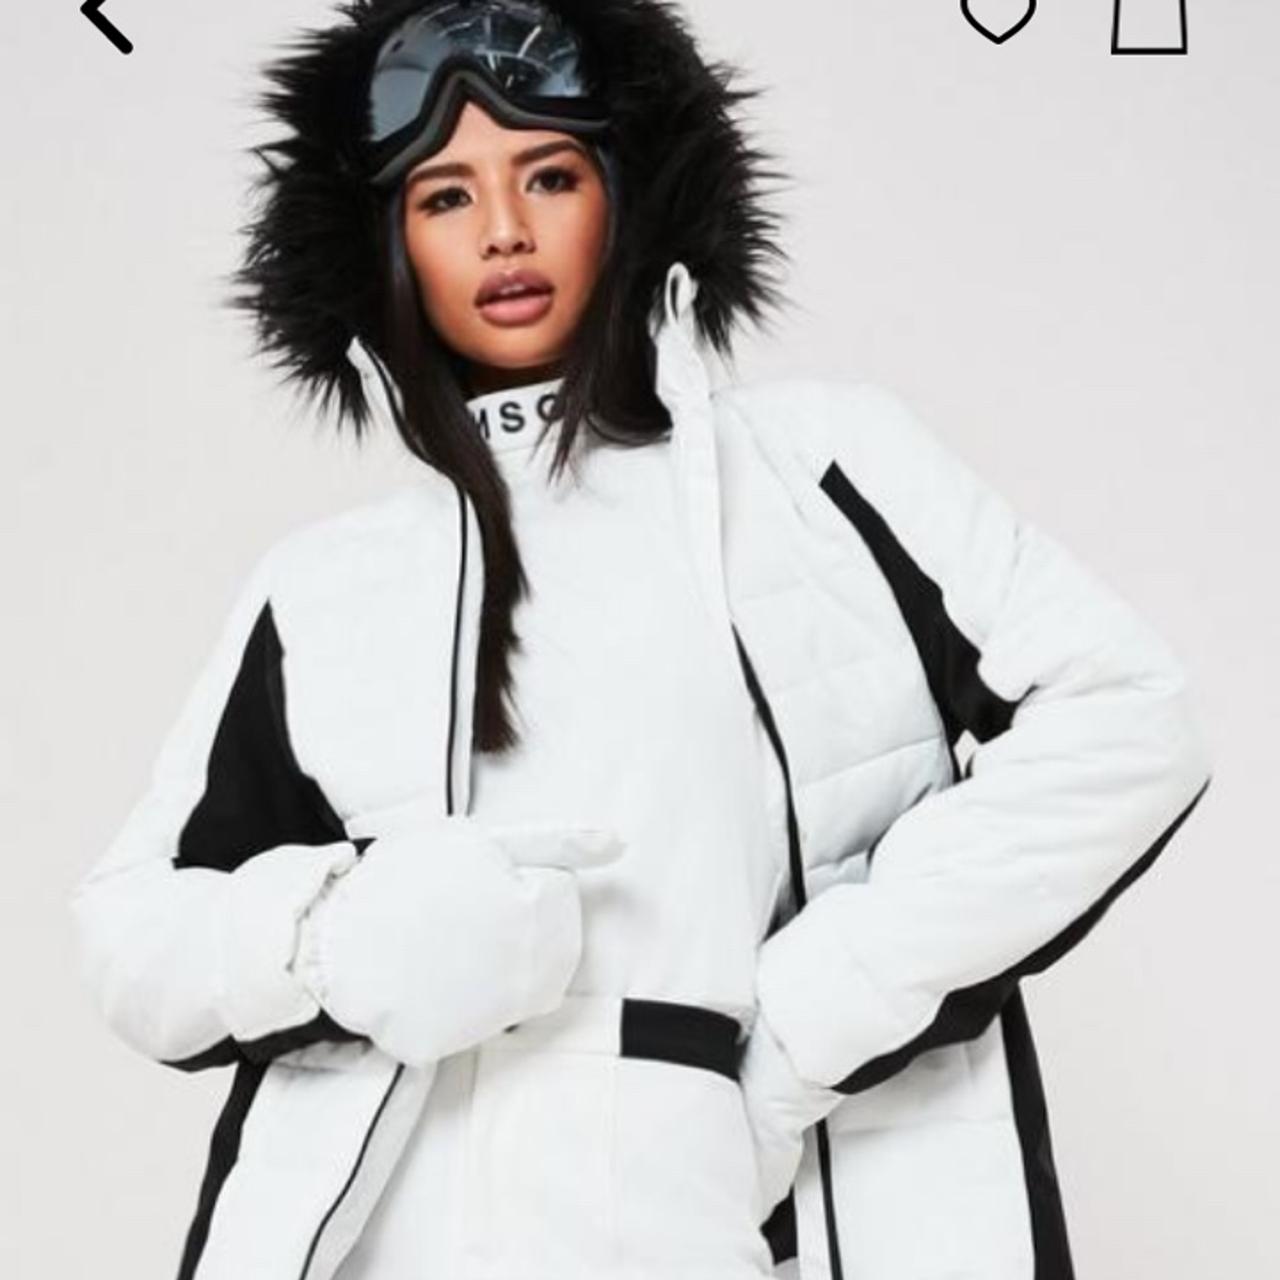 Missguided on X: 💎 Just add Aperol 💎 Look 🔥 on the slopes in the 'msgd  ski white animal print padded jacket with mittens' (£64/$136)   on site now 🛒#missguided  /